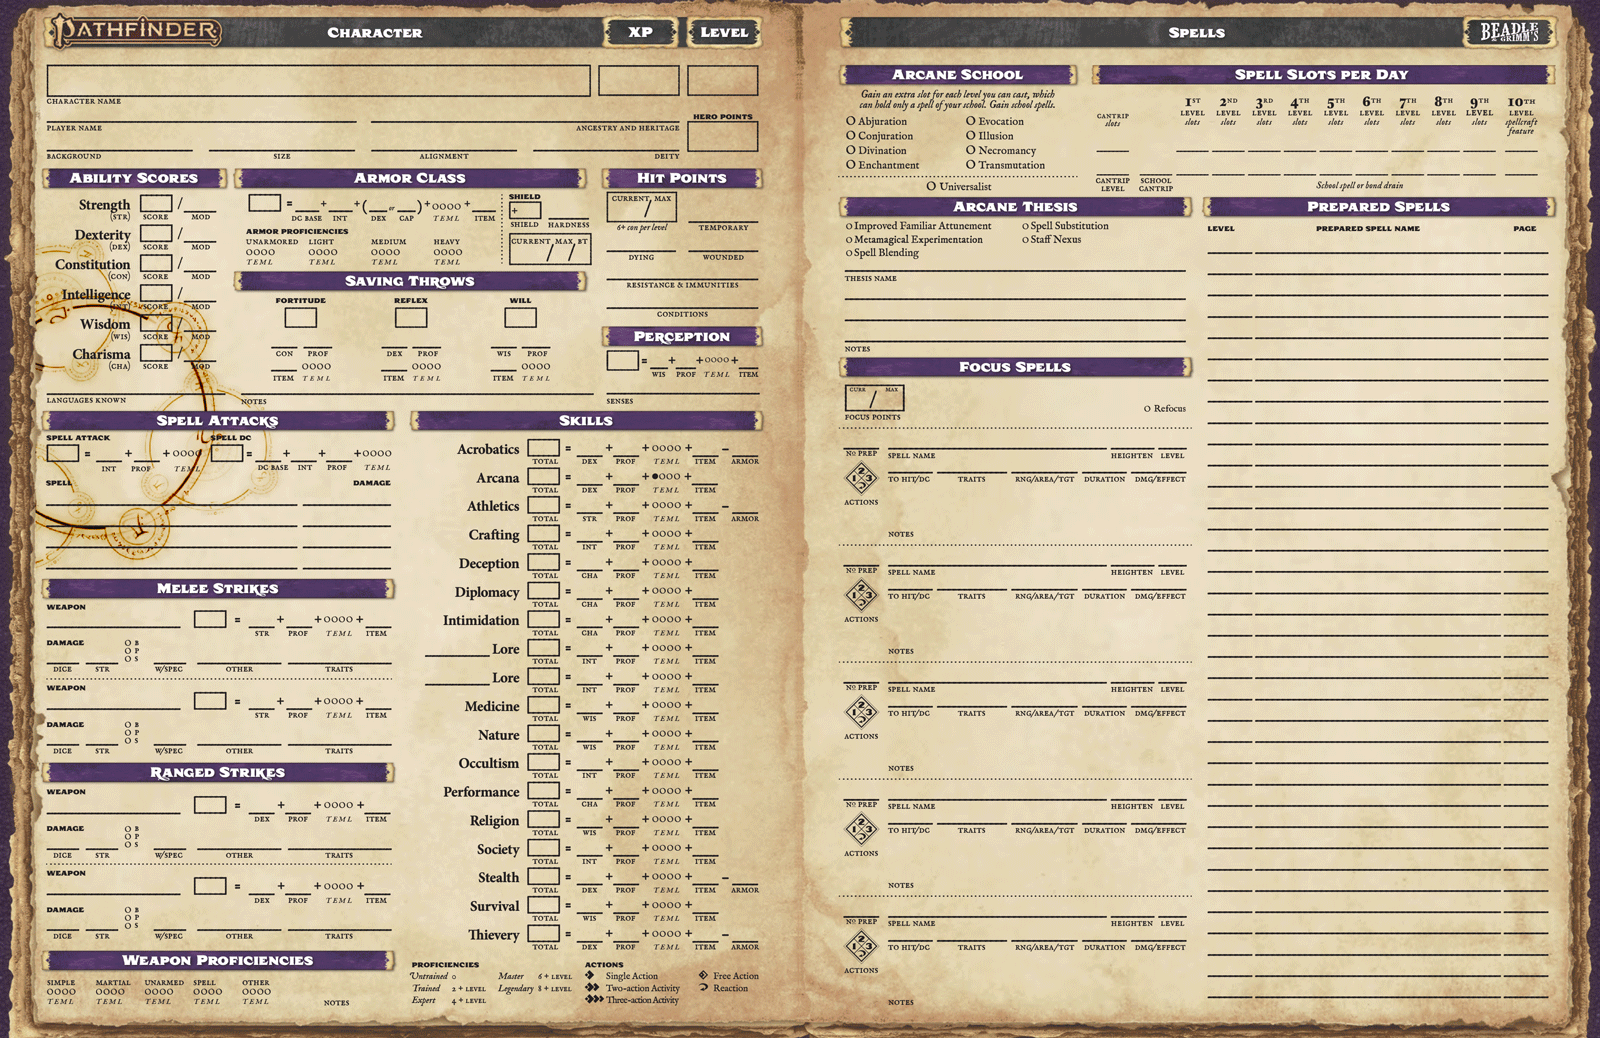 Beadle & Grimm's character chronicle character sheet layed out on two pages with a parchment-like background